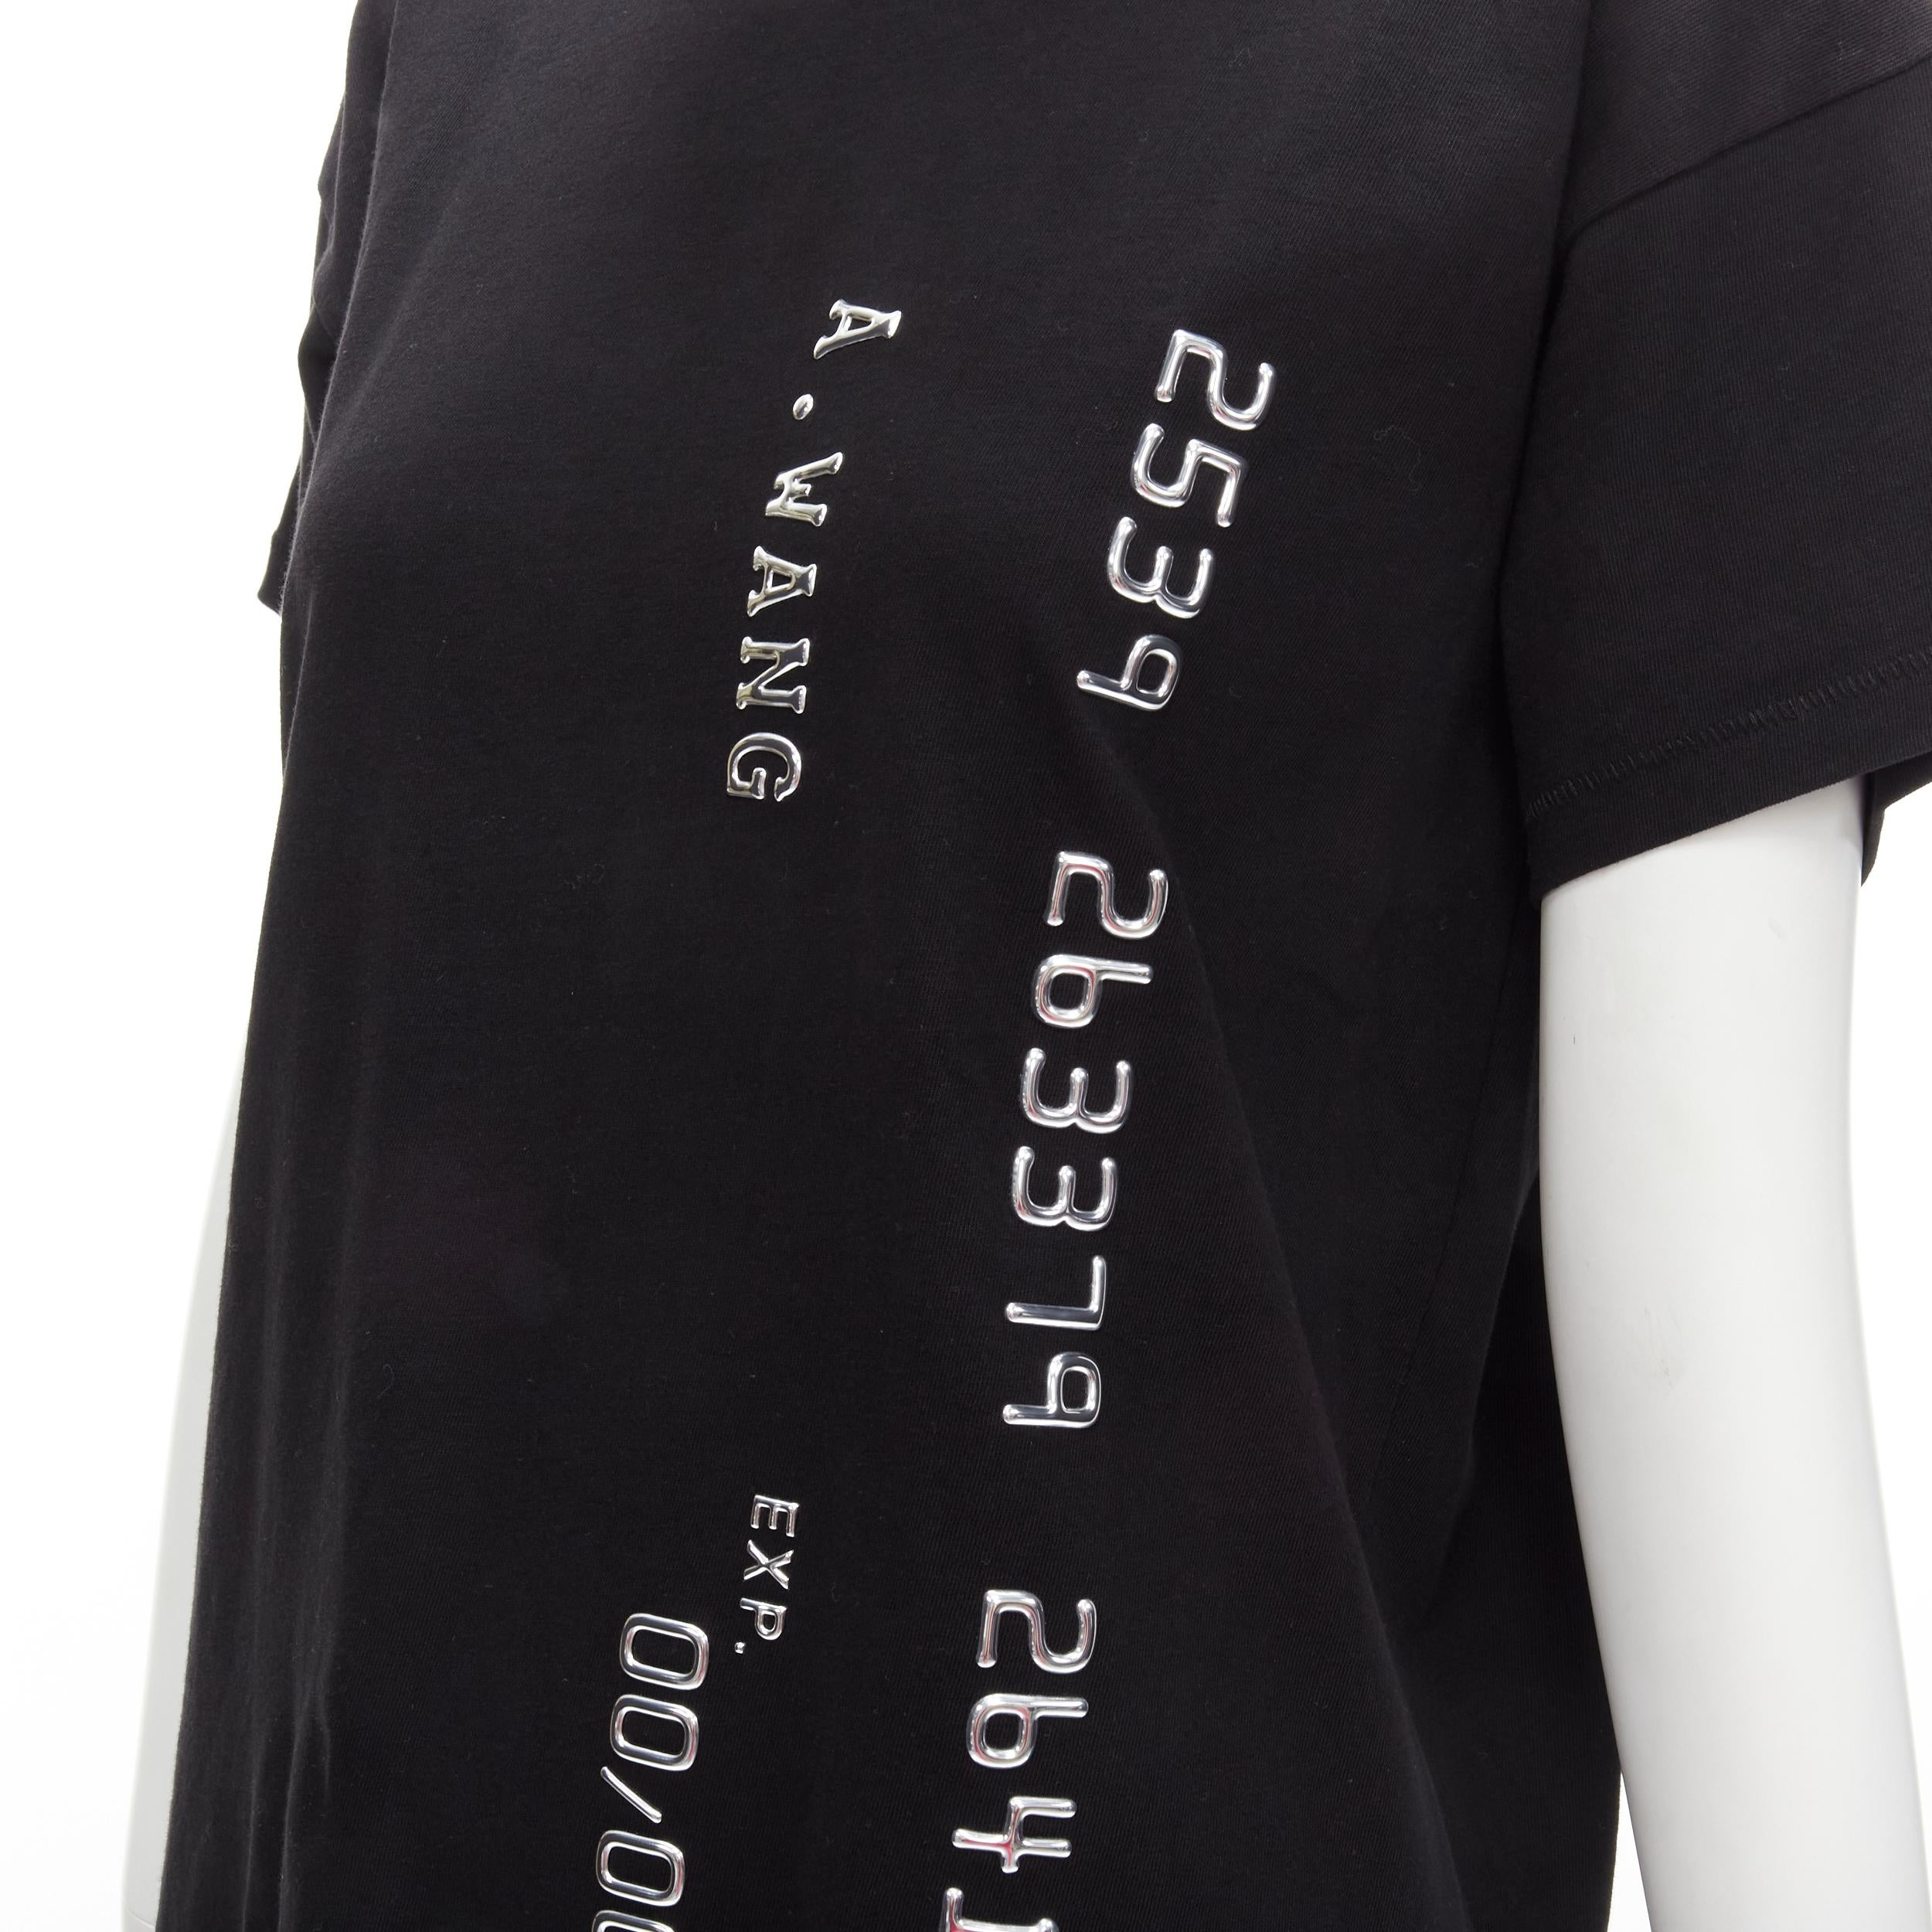 ALEXANDER WANG Black Credit Card silver letter embellished cotton tshirt S 
Reference: ANWU/A00506 
Brand: Alexander Wang 
Collection: Credit Card 
Material: Cotton 
Color: Black 
Pattern: Solid 

CONDITION: 
Condition: Excellent, this item was